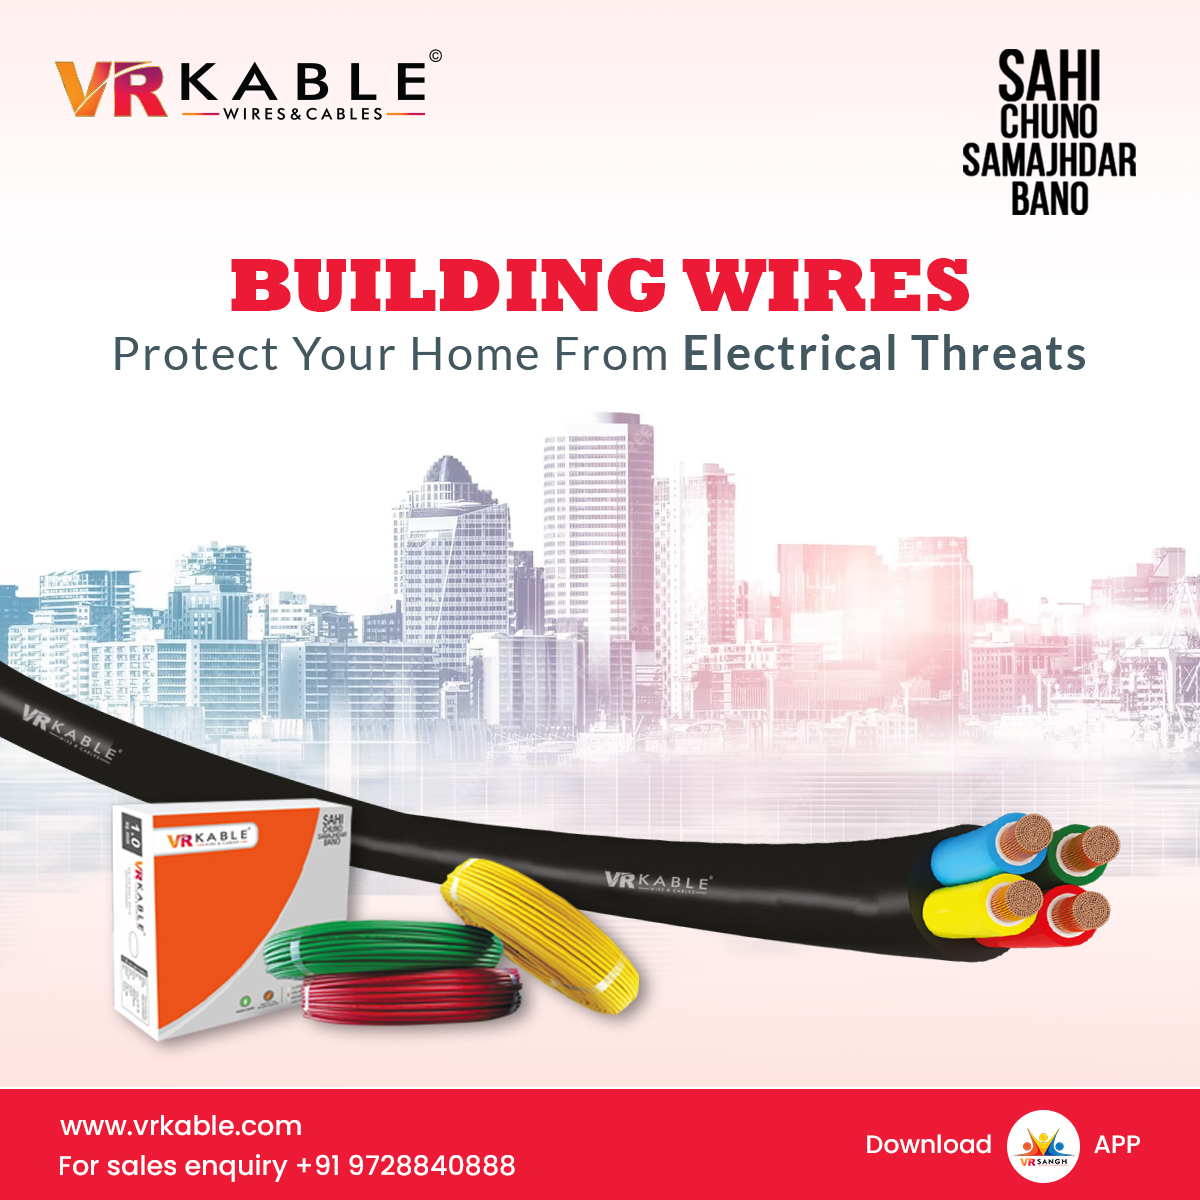 🔌 Elevate your home's safety with VR KABLE Building Wires! Shield your space from electrical threats and ensure a secure environment. 💡 

For sales inquiries, reach out to us at +91 9728840888. 

#VRKABLE #HomeSafety #ElectricalProtection #BuildingWire #Wire #Cable #Quality